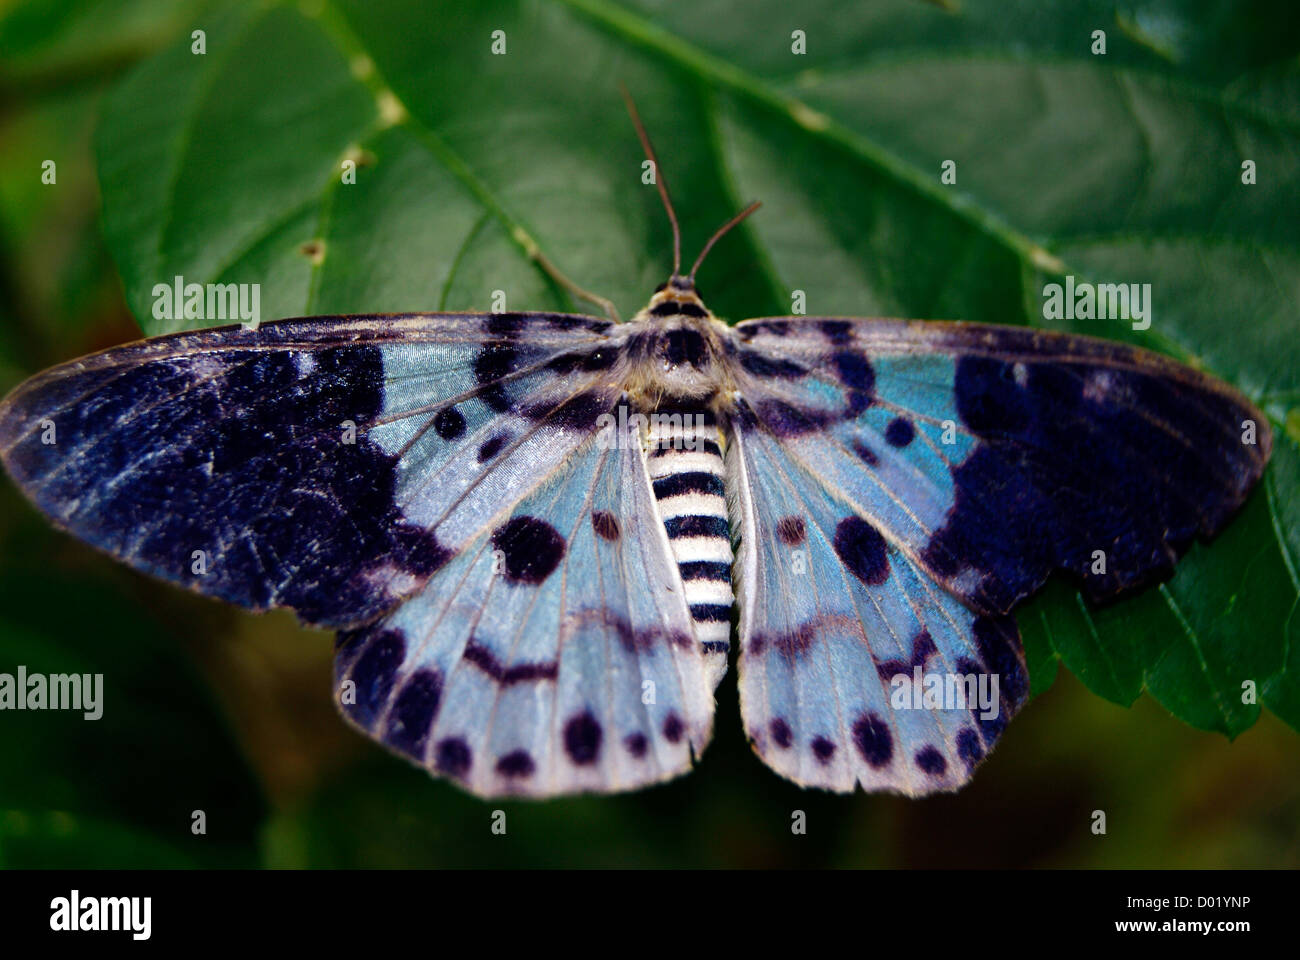 Dysphania percota the Blue Tiger Moth Butterfly Stretching wings sitting on leaf Stock Photo